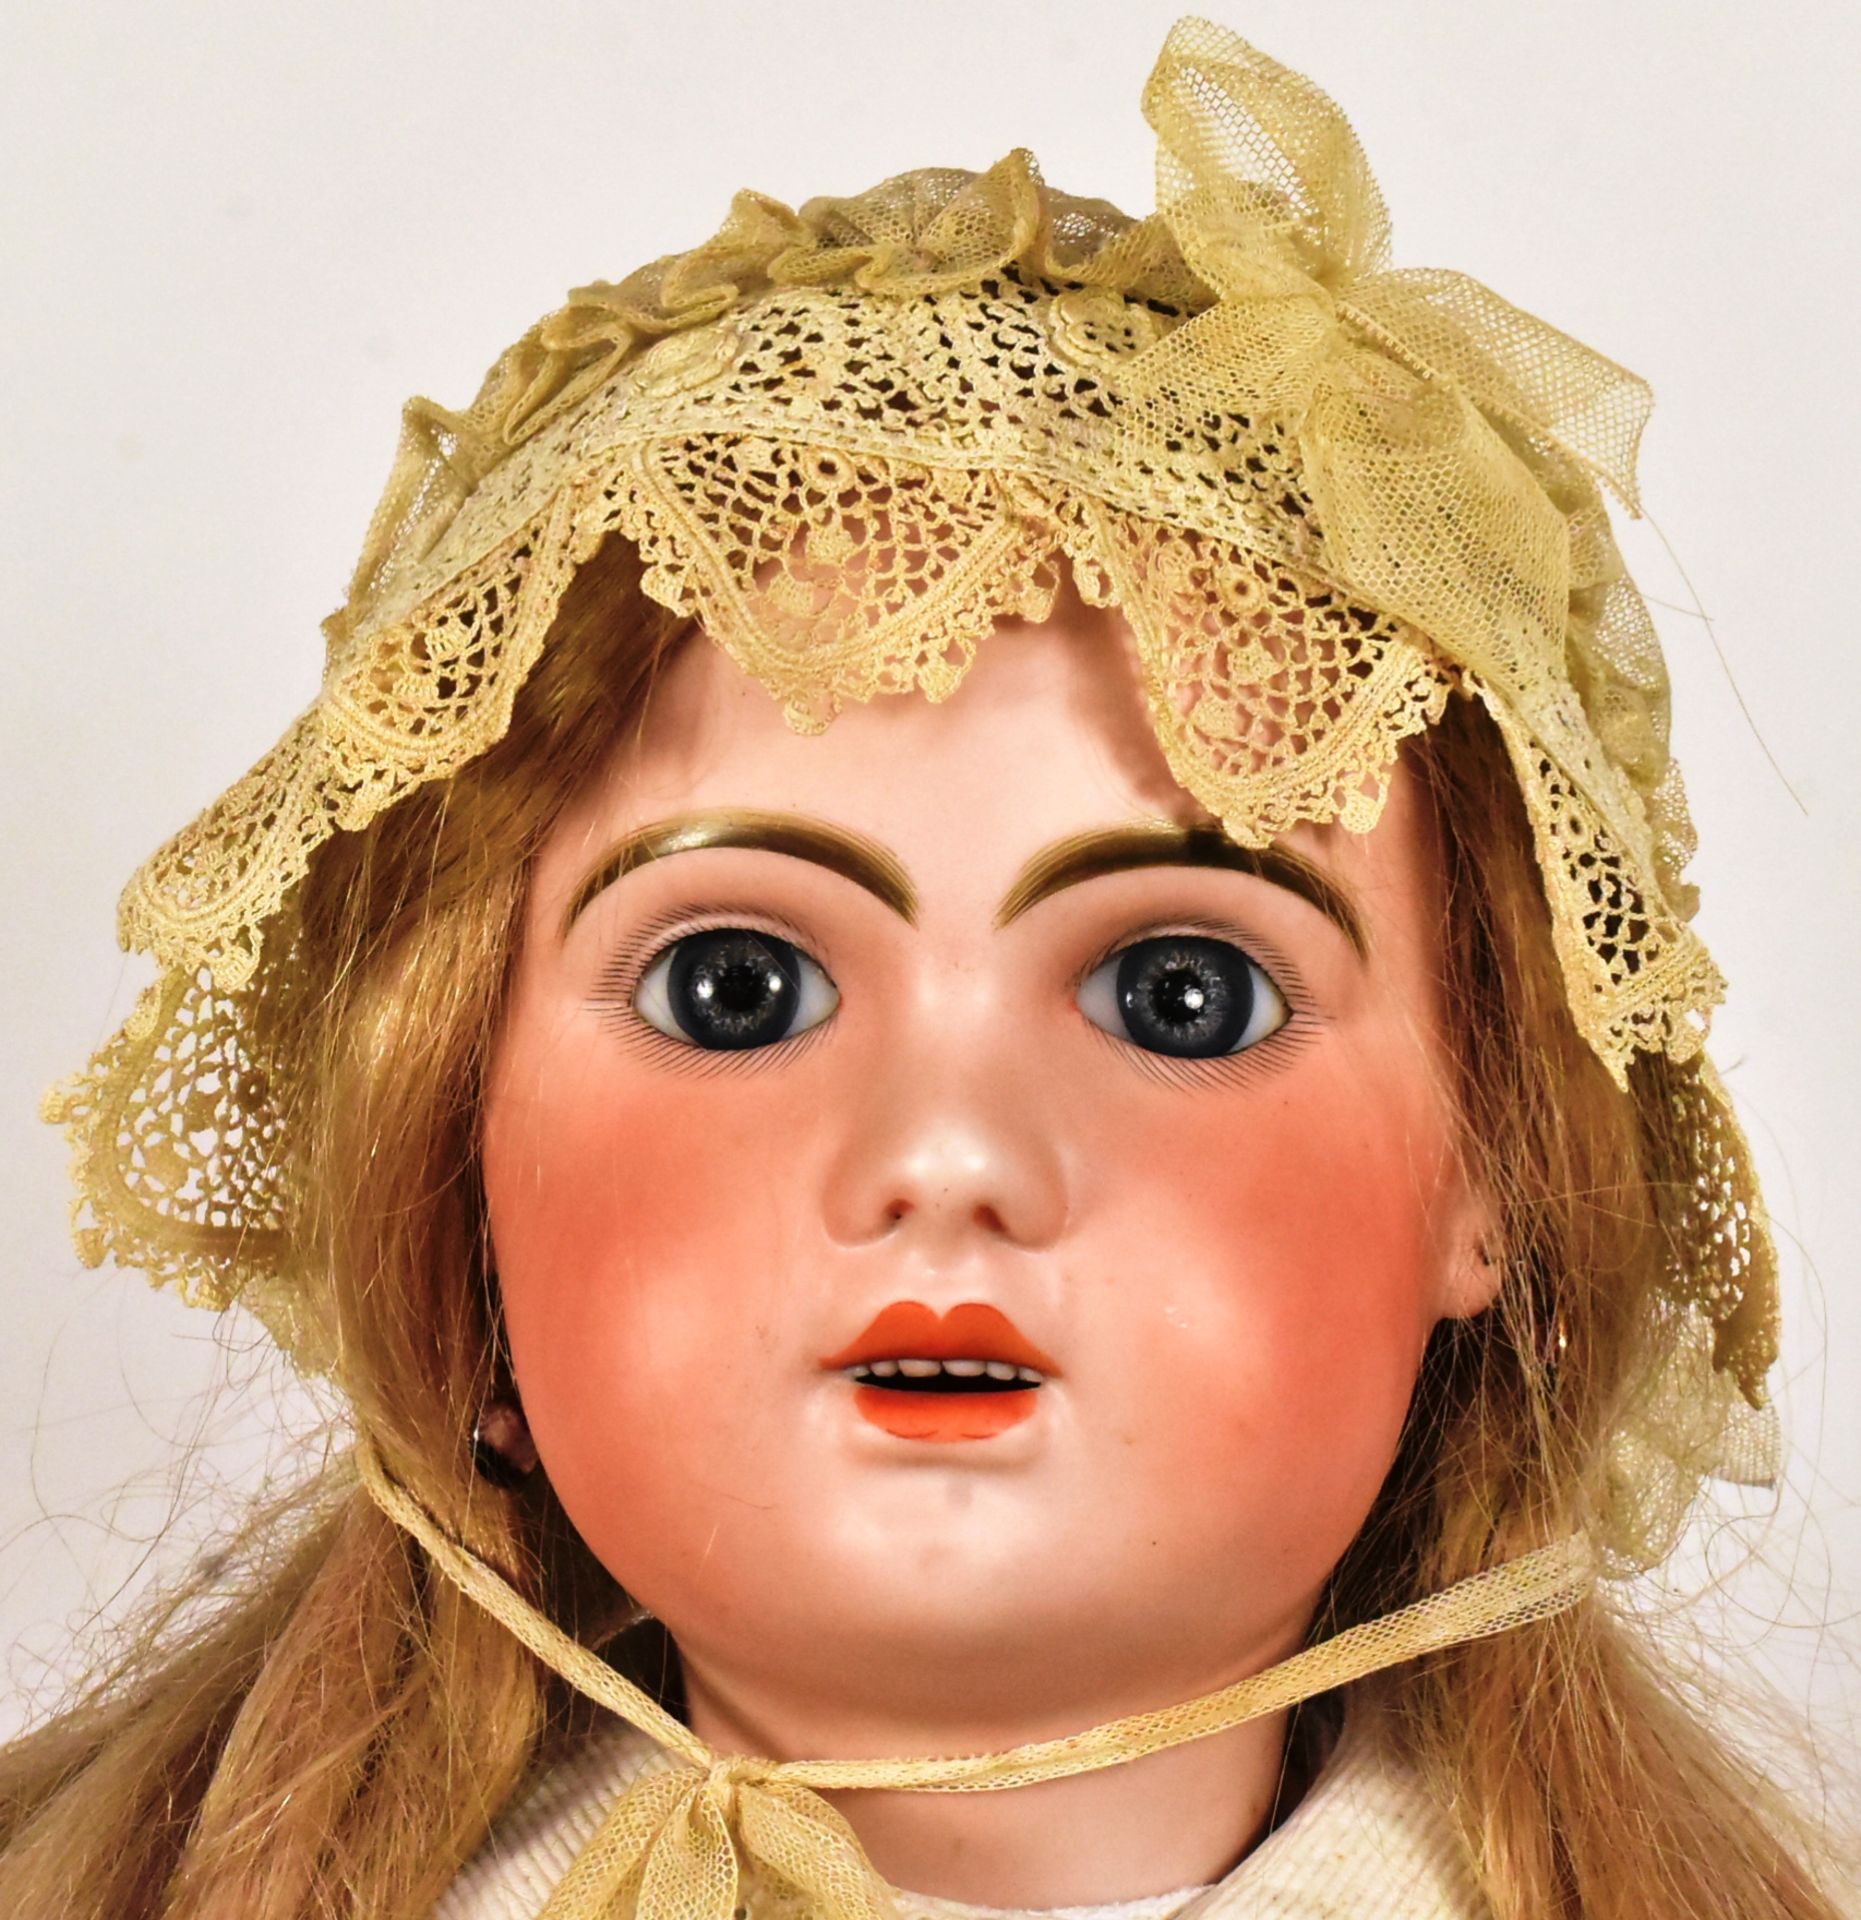 DOLLS - LARGE FRENCH JUMEAU BISQUE HEADED DOLL - Image 2 of 6